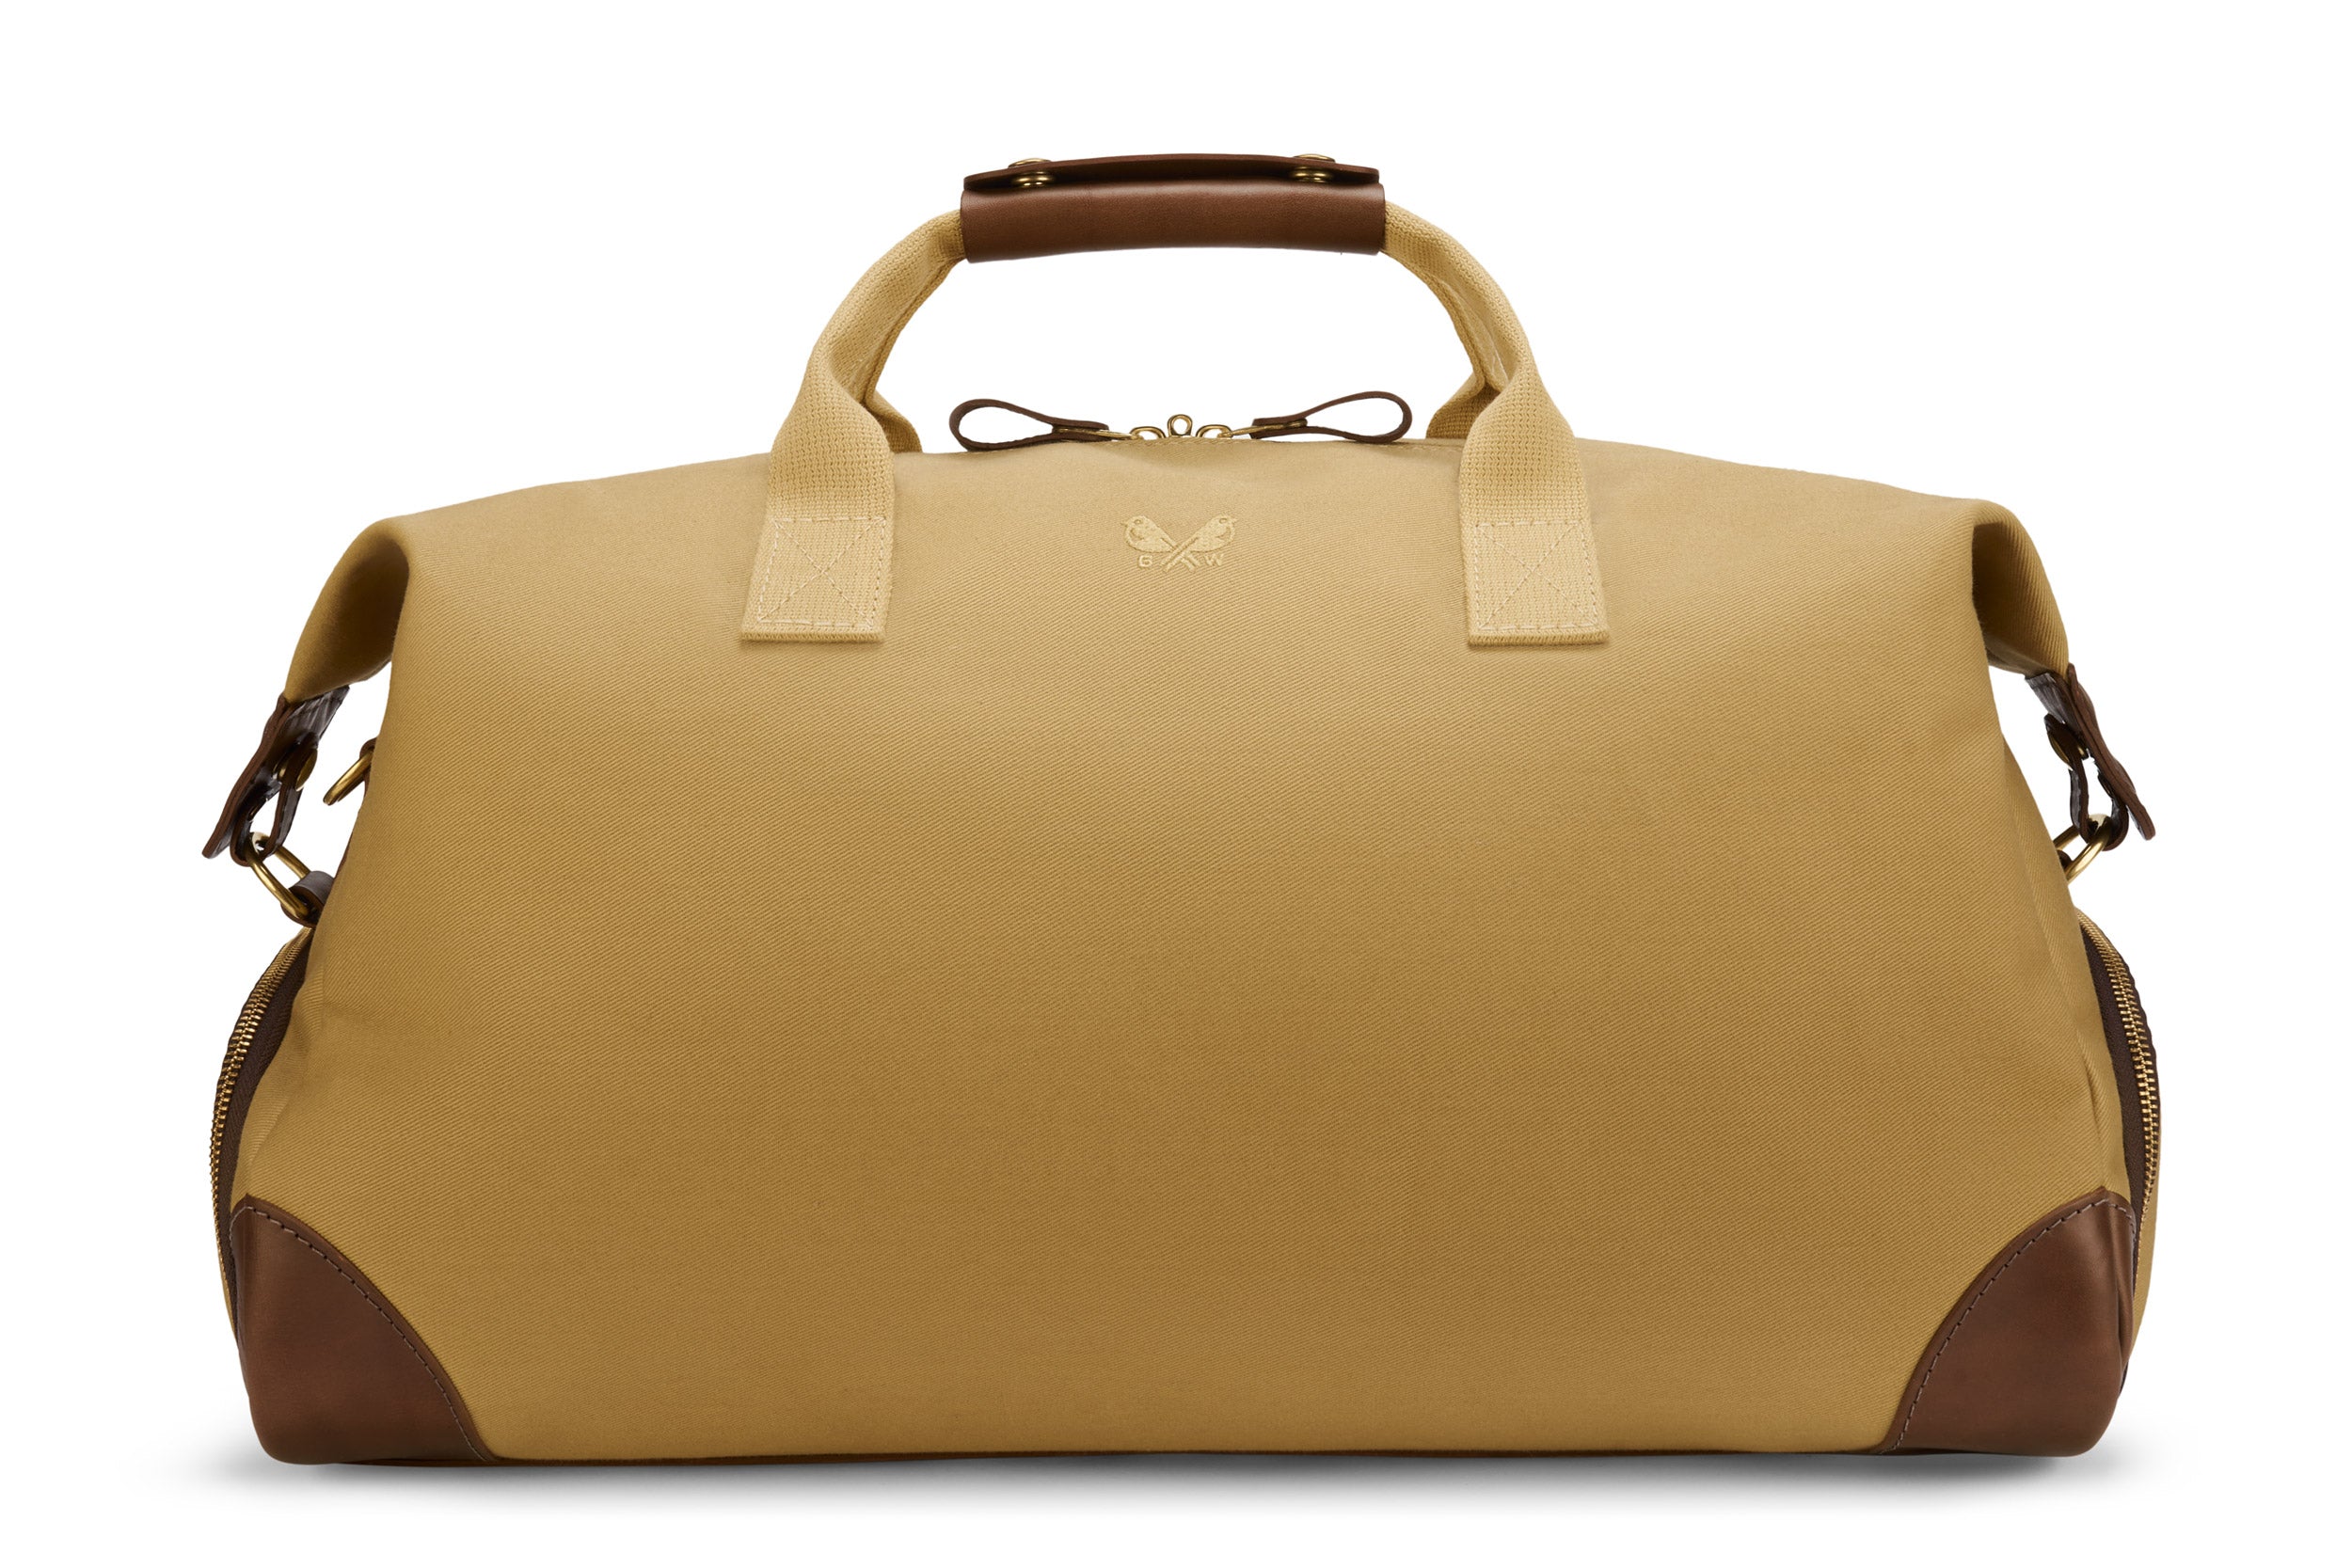 6 of the best luxury bags and accessories from Bennett Winch | The Coolector